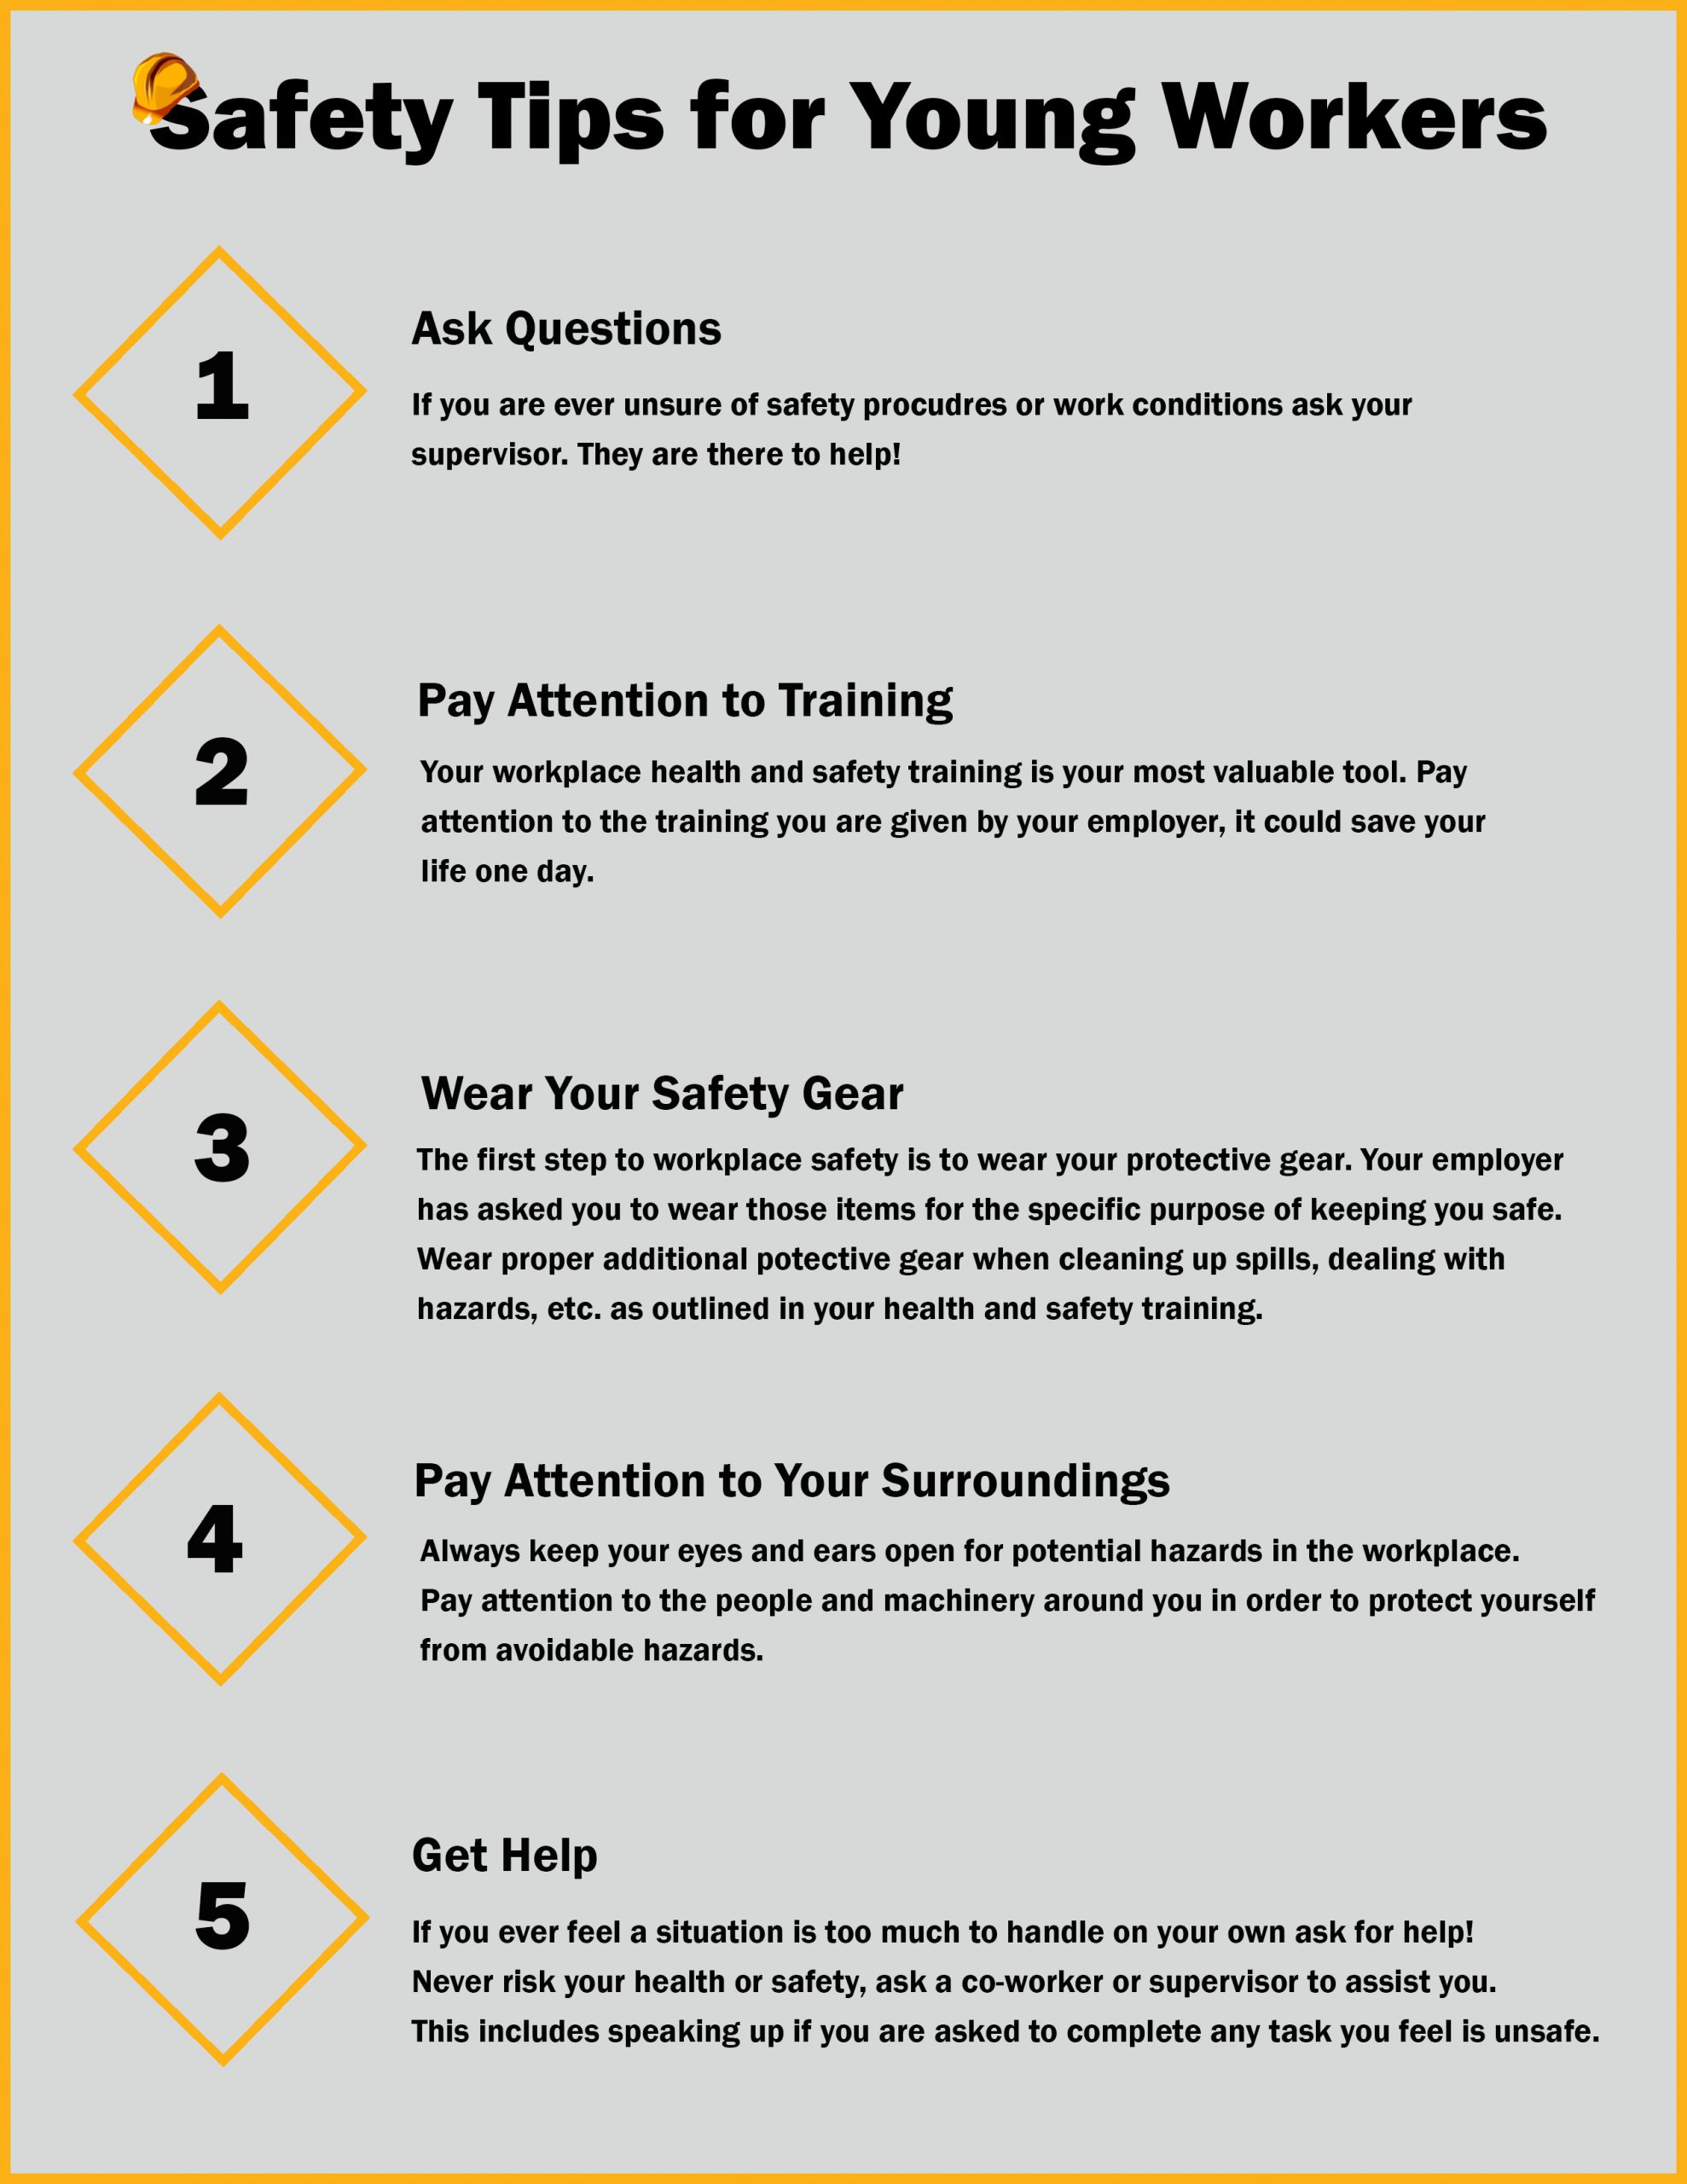 Safety tips for young workers